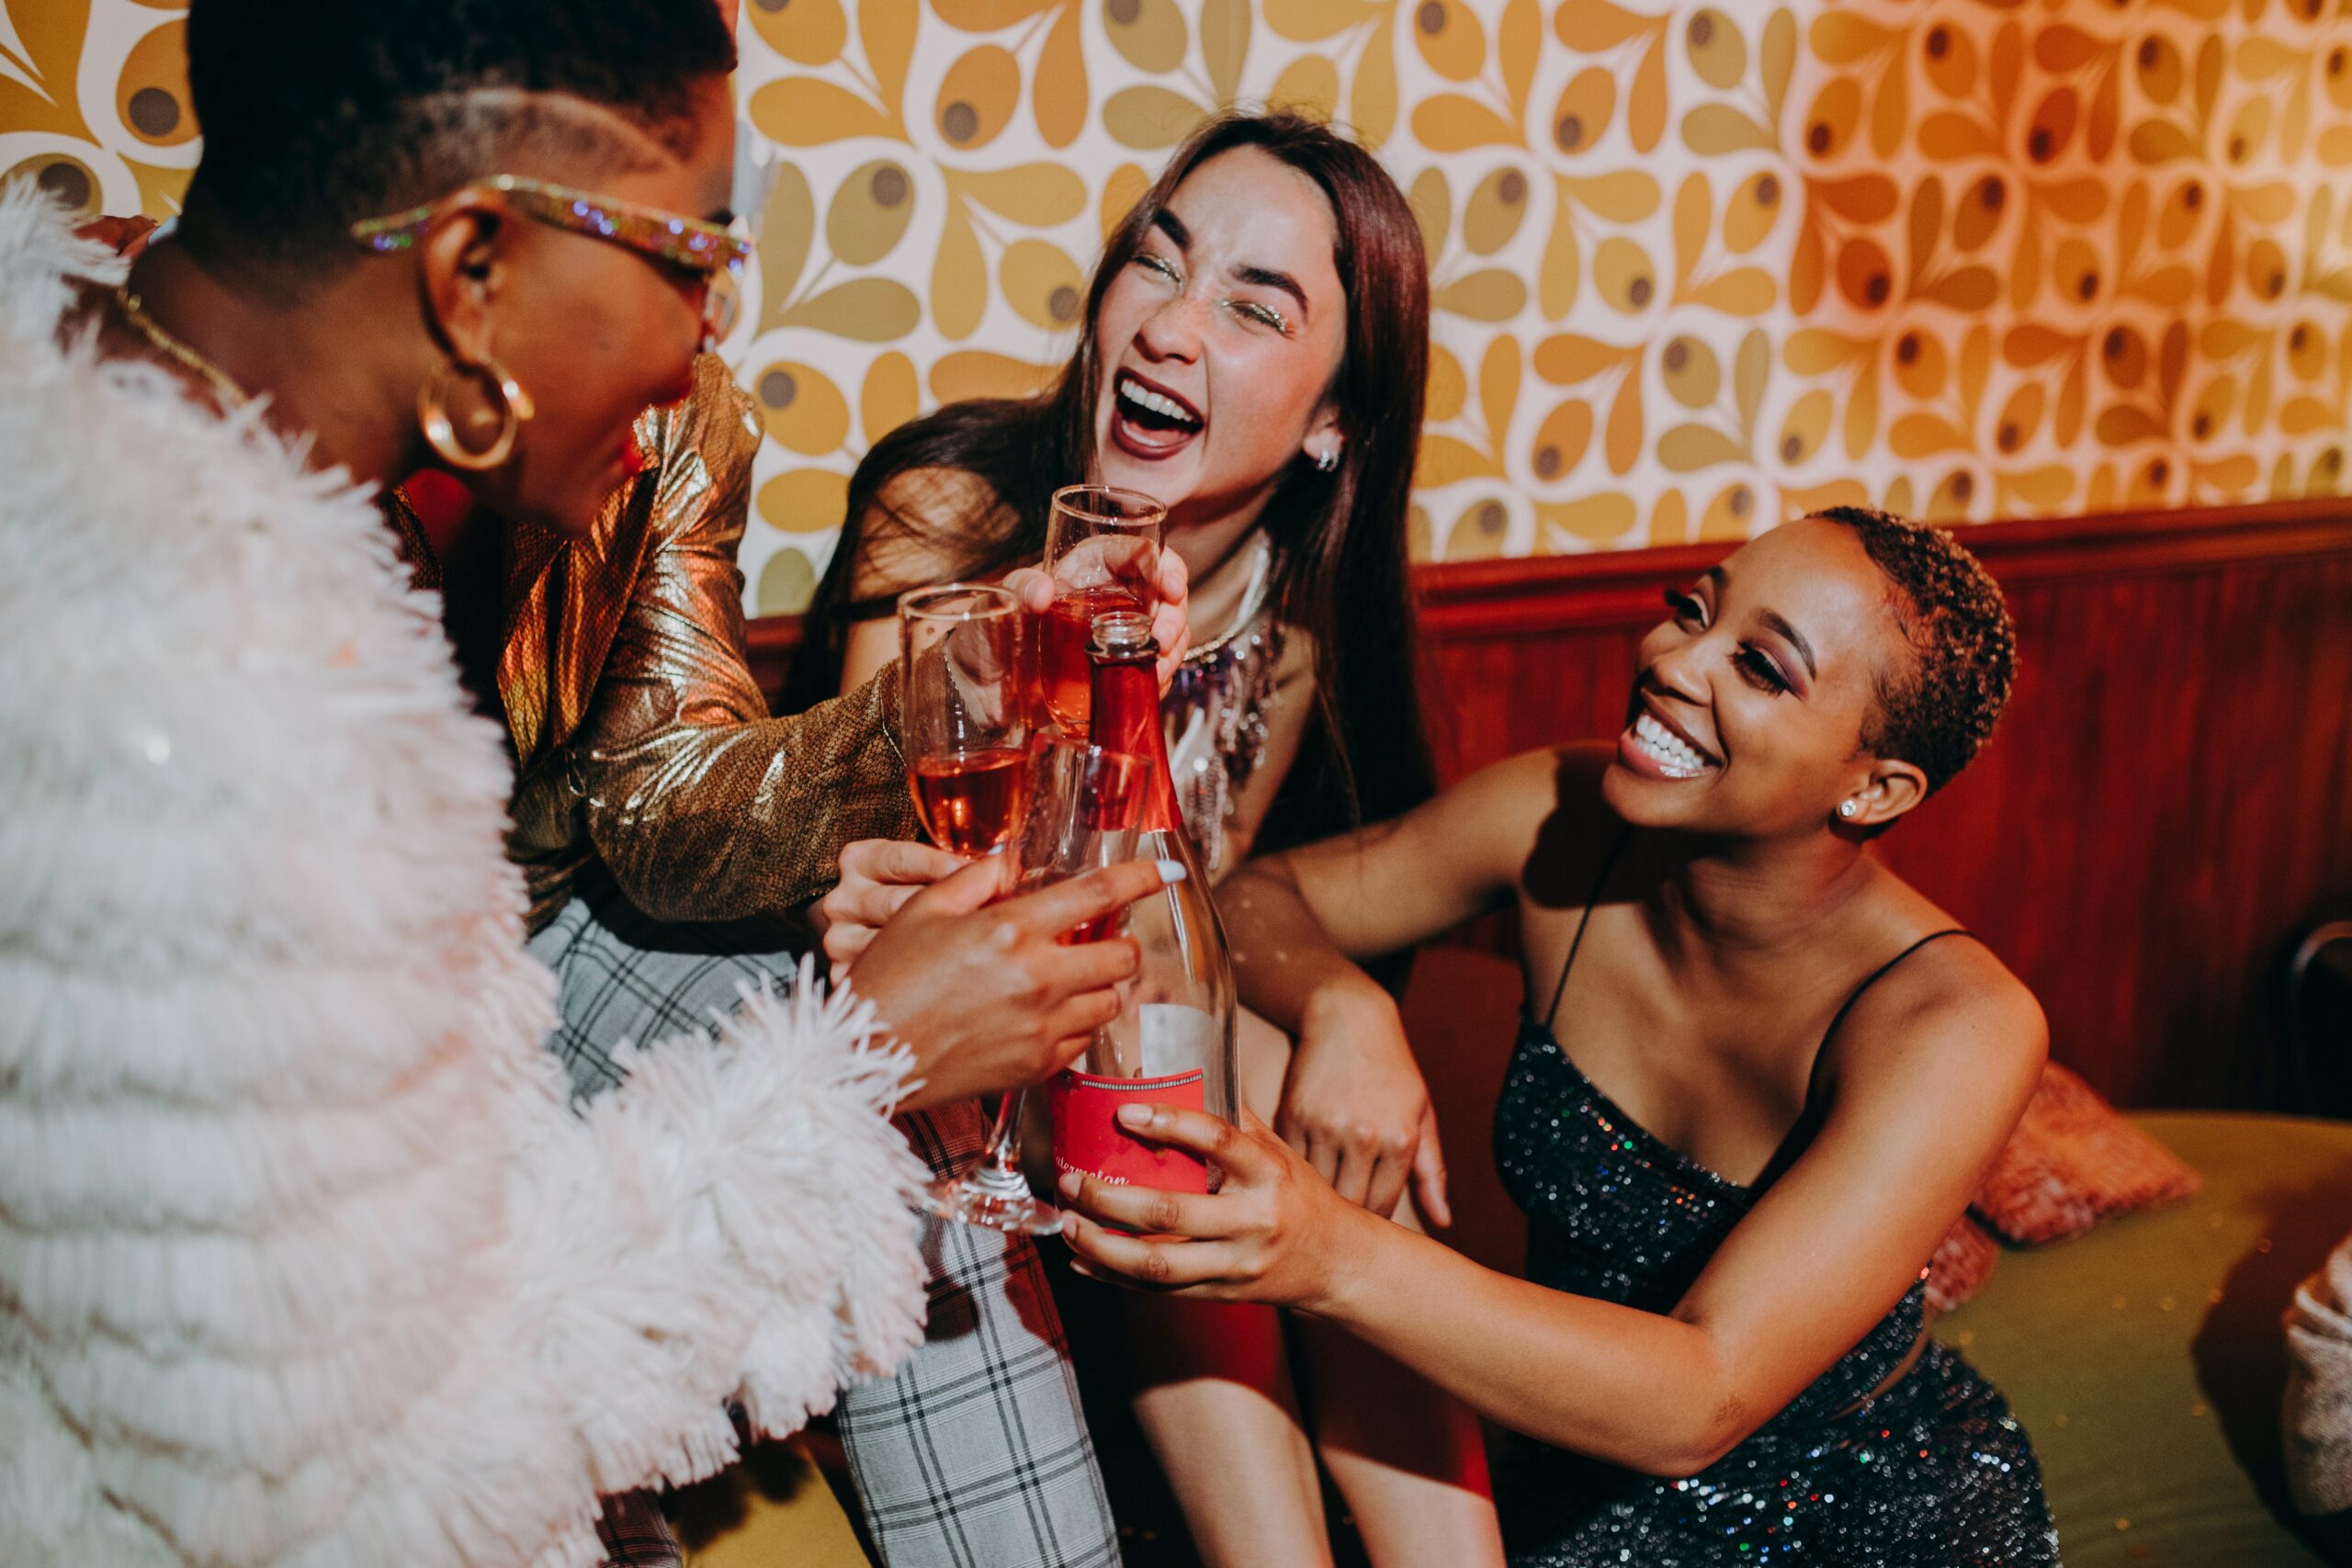 three women celebrating with glasses raised at a party Her life magnified